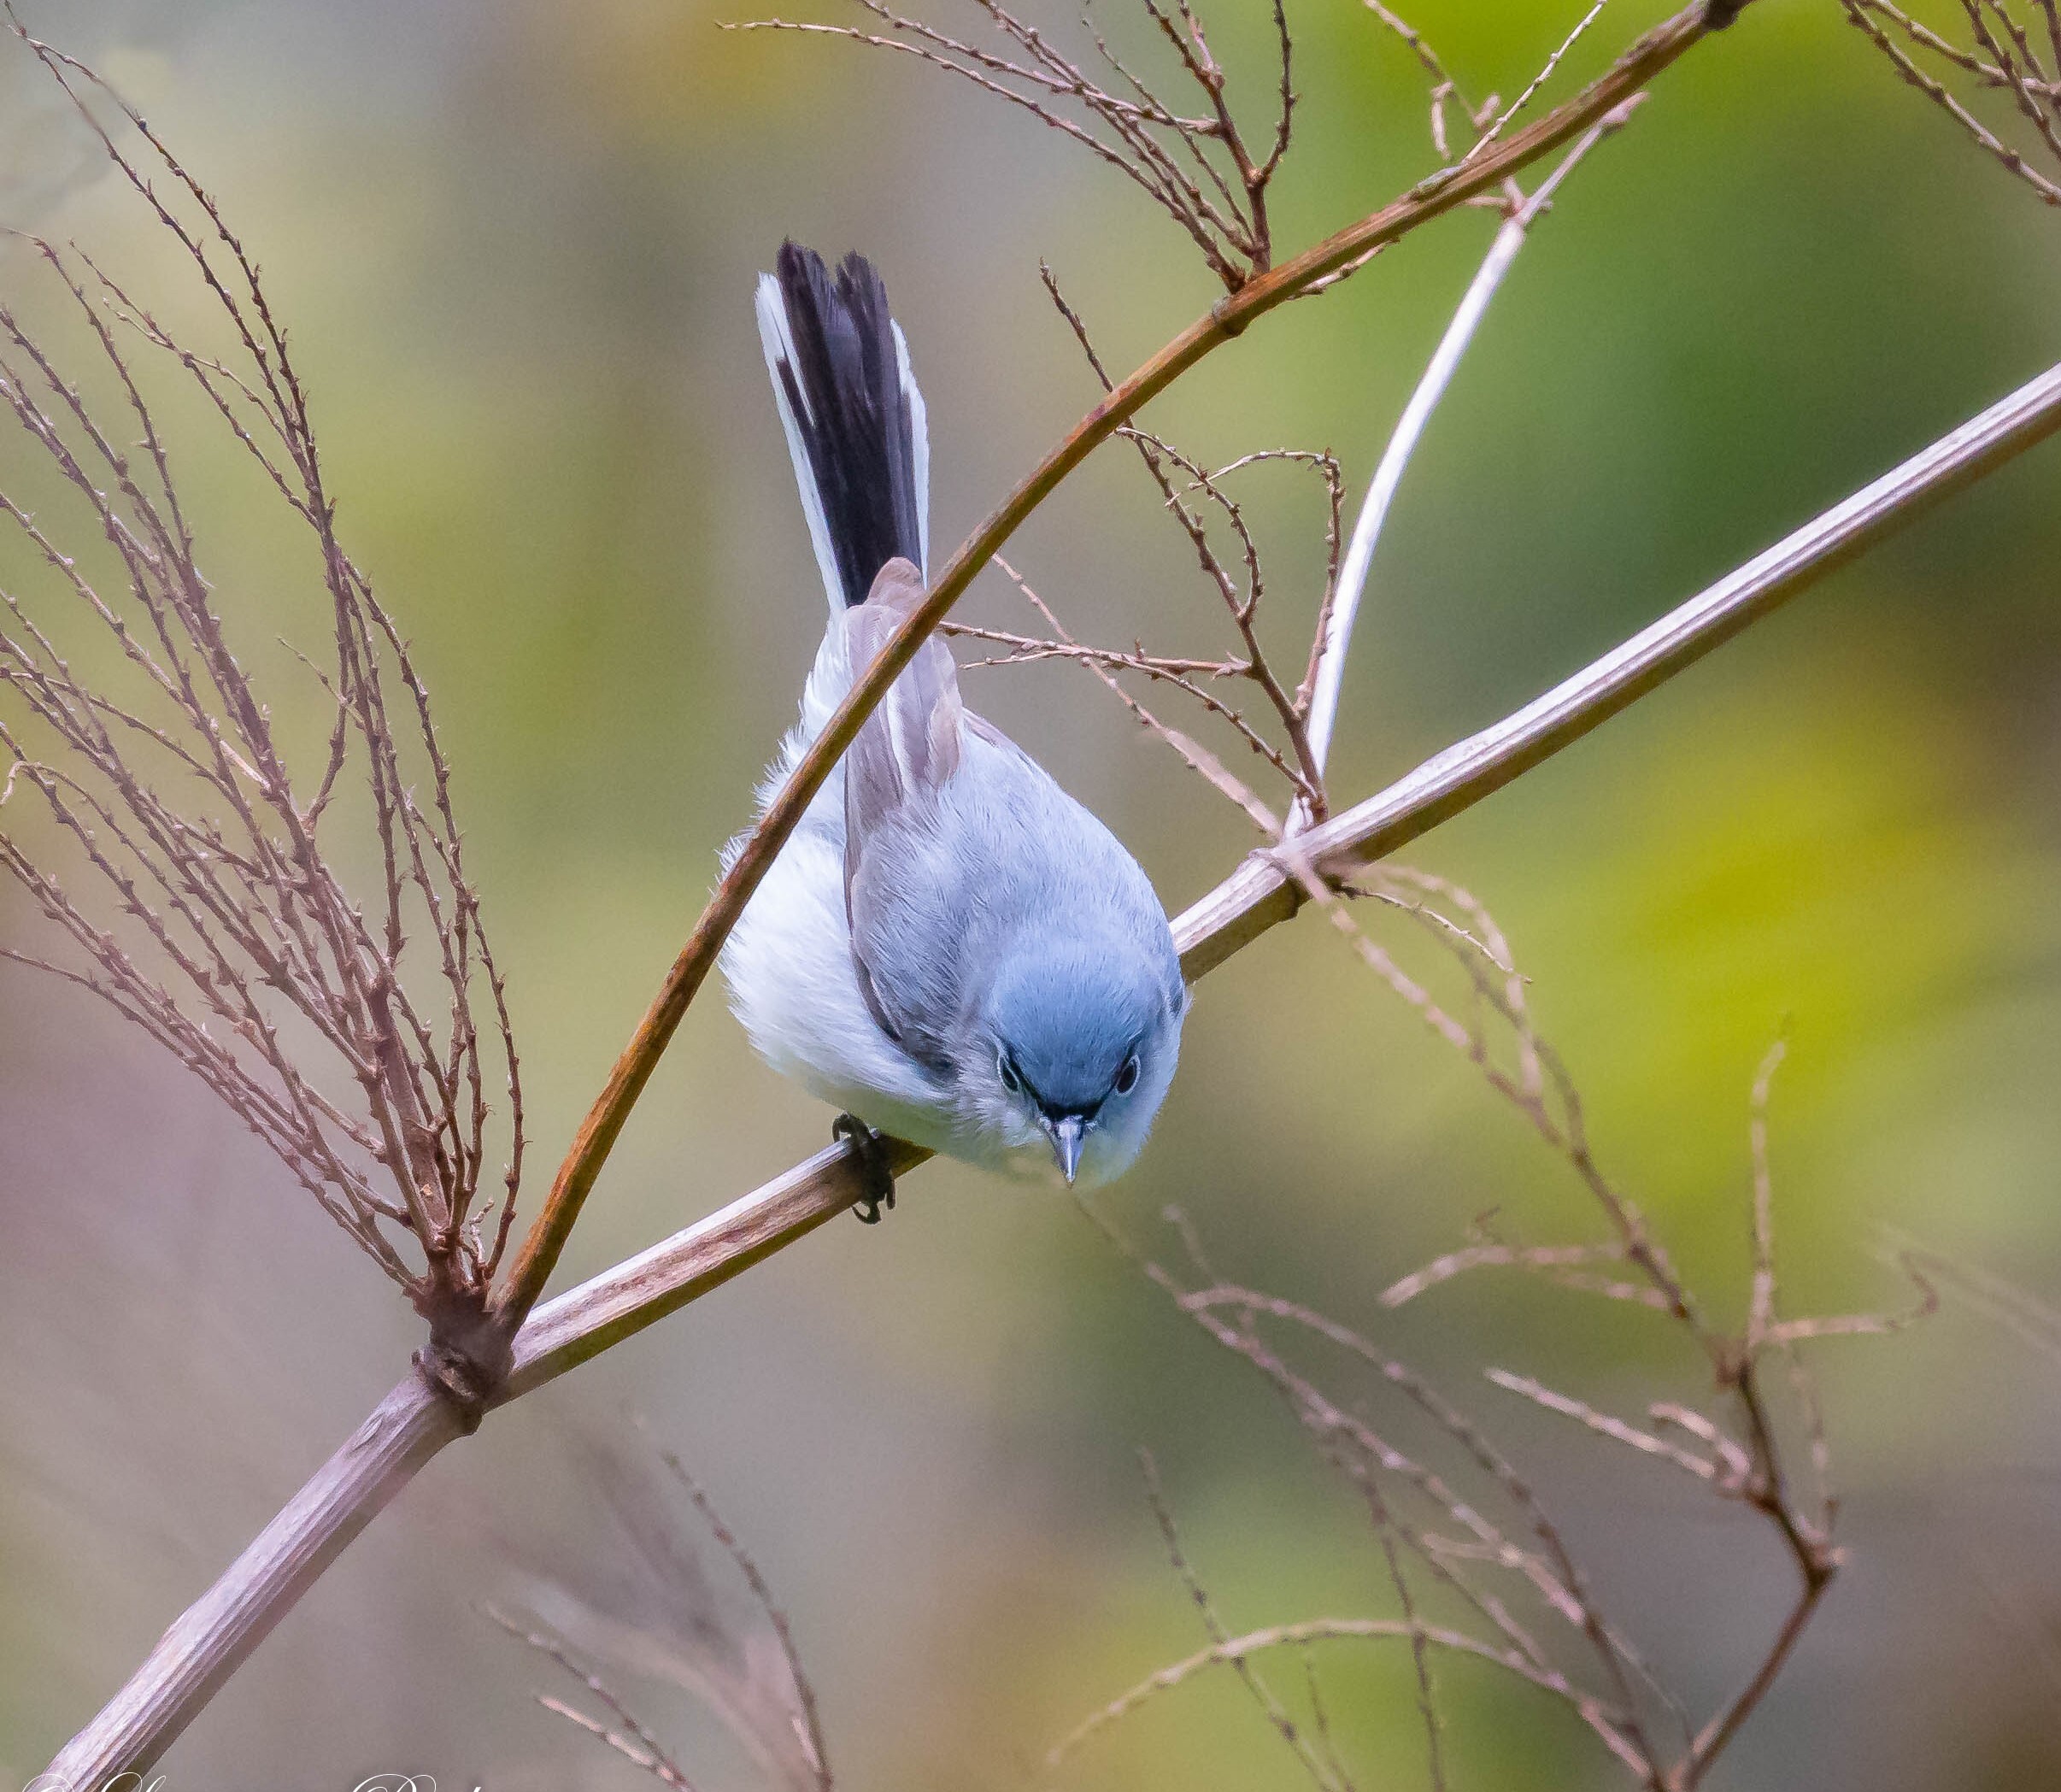 The Blue-Gray Gnatcatcher's wheezy tones may be heard in North Mount Loretto State Forest during nesting season. Photo: <a href="https://www.flickr.com/photos/51819896@N04/" target="_blank">Lawrence Pugliares</a>